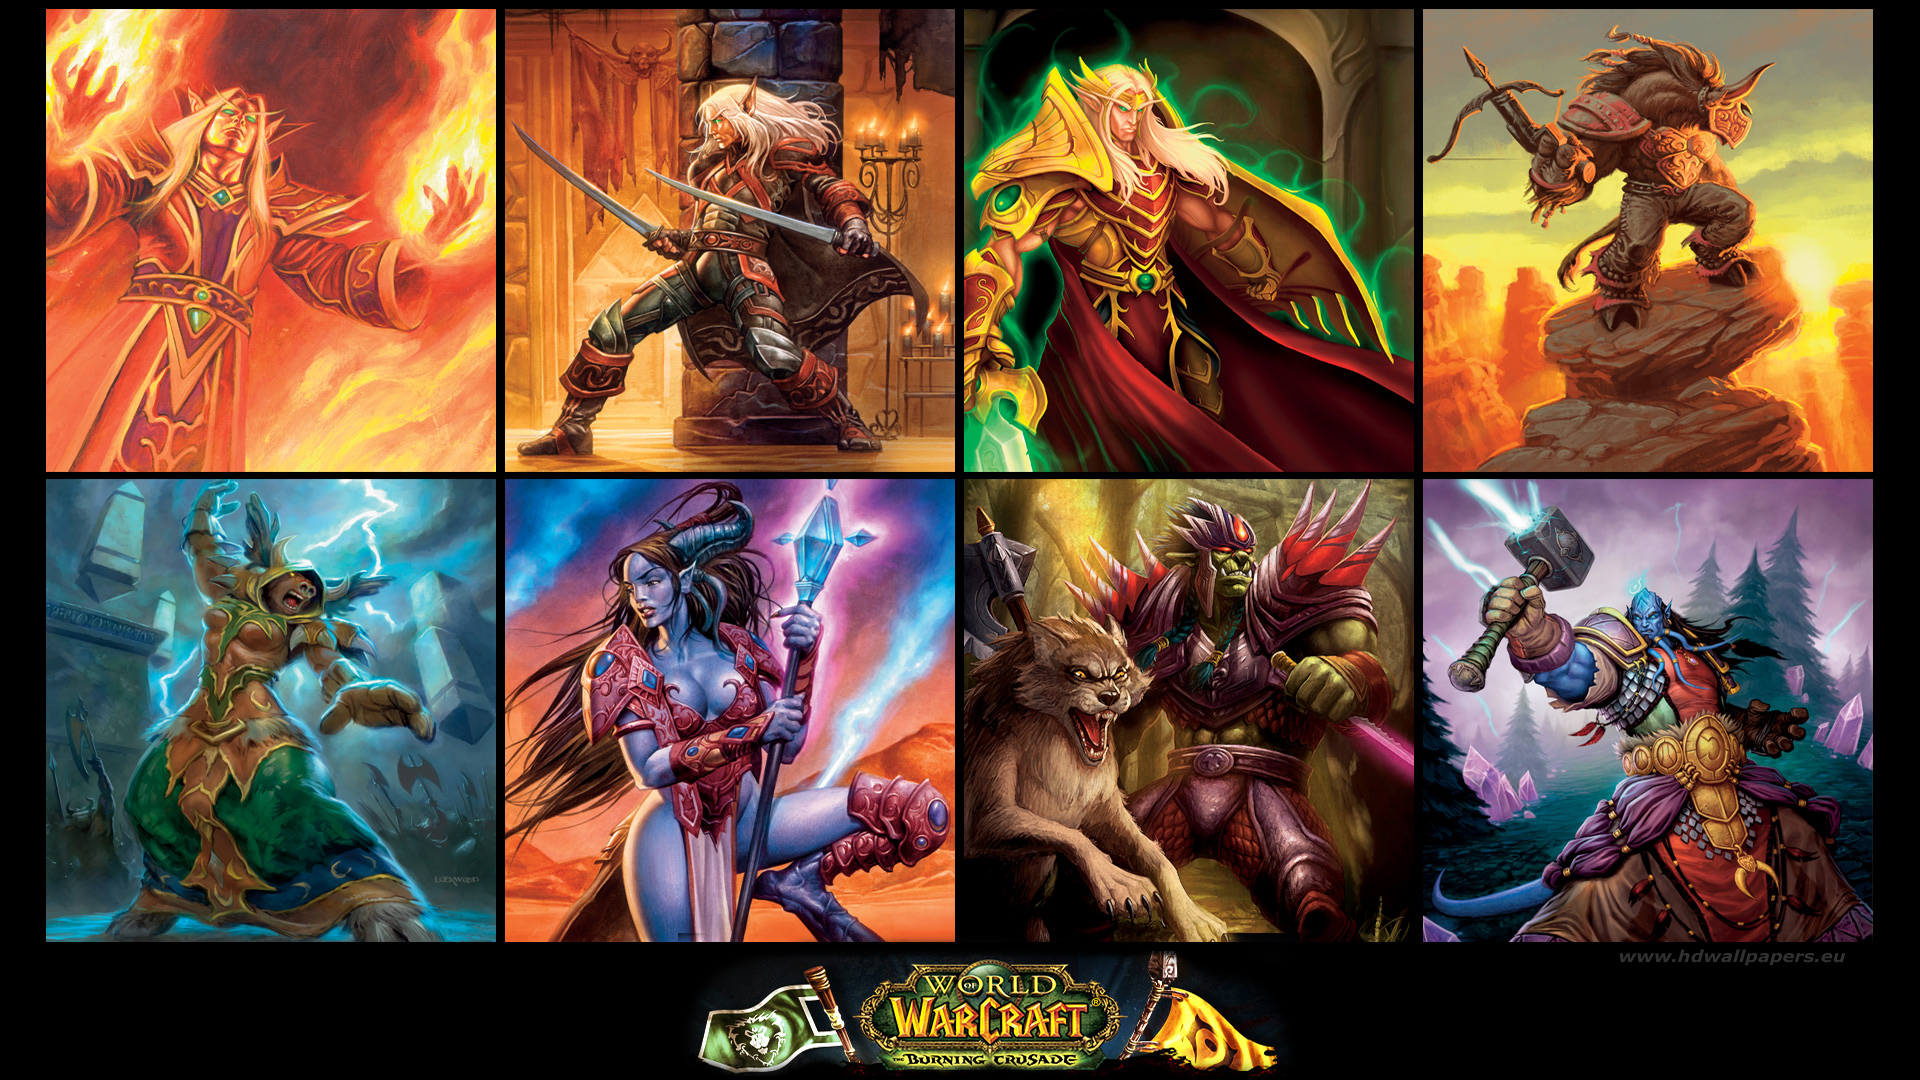 HD Wallpaper Wow World Of Warcraft Special